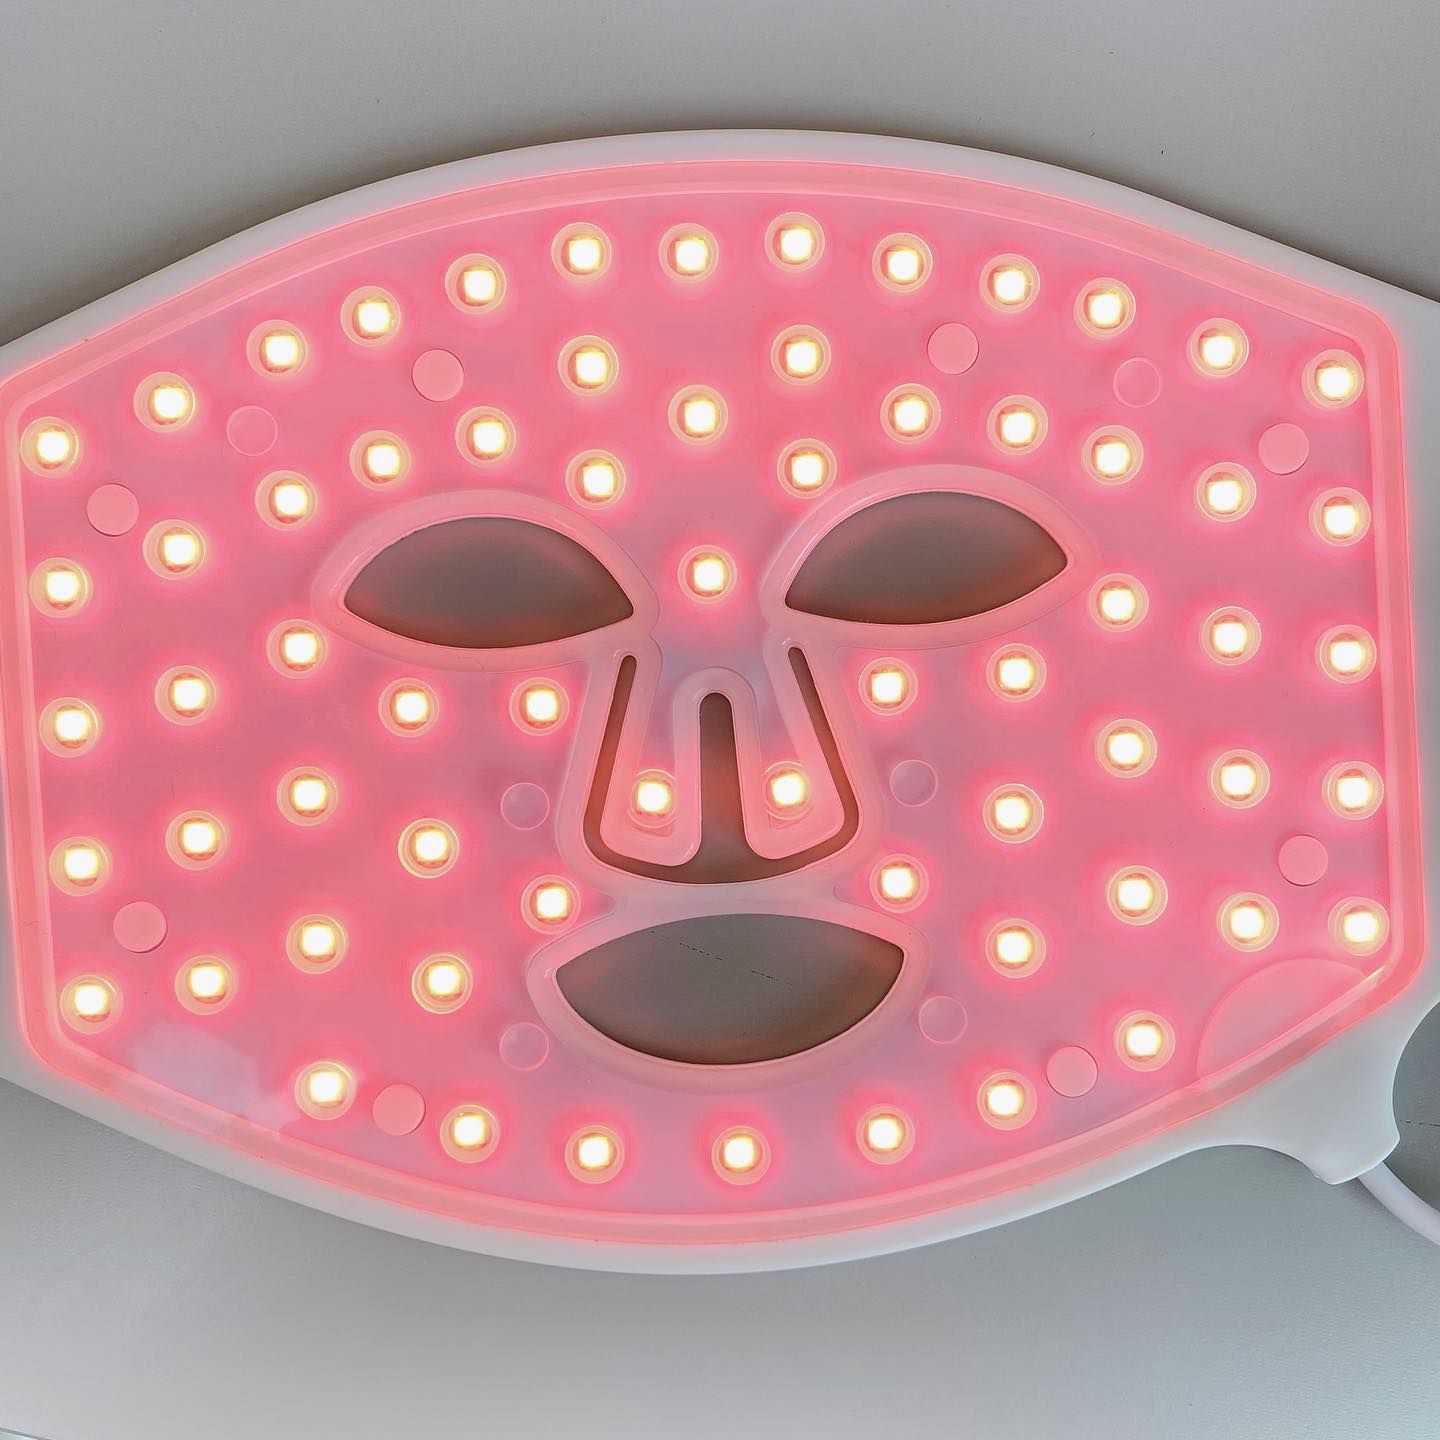 CurrentBody LED Mask Review